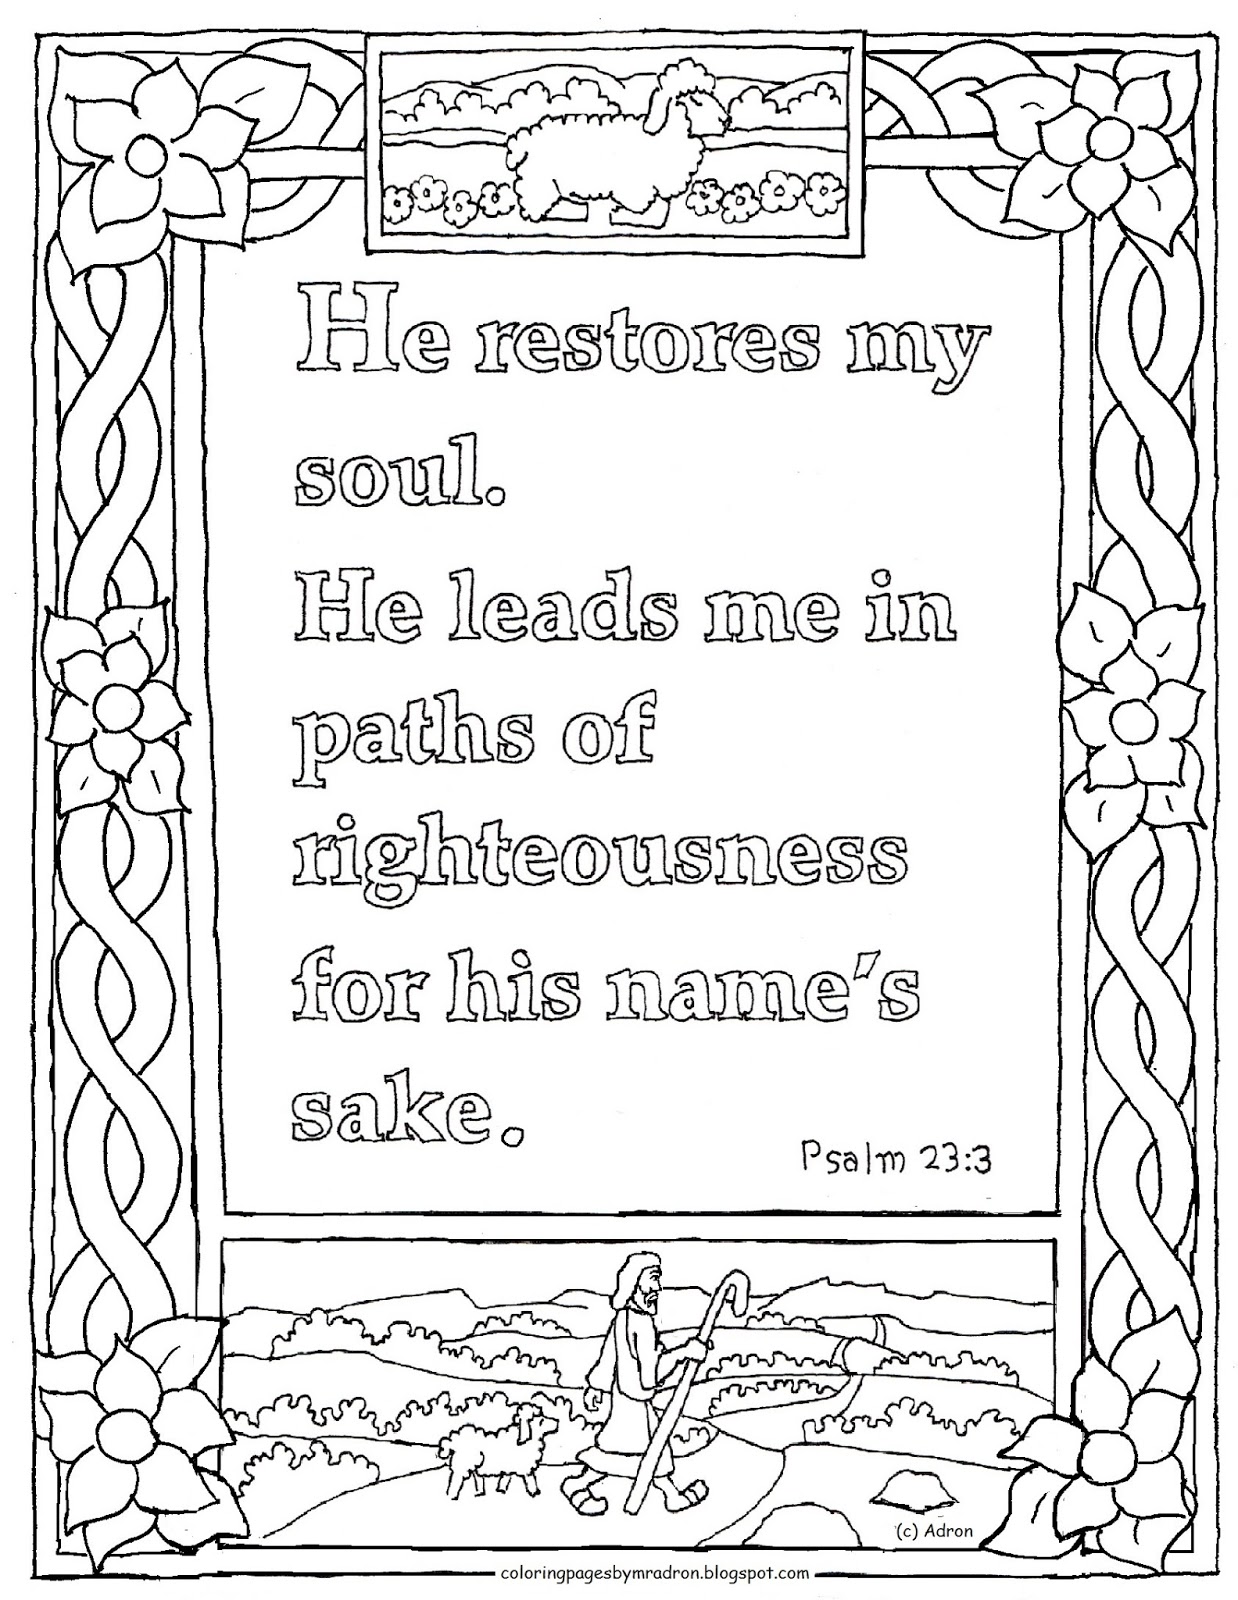 coloring-pages-for-kids-by-mr-adron-printable-psalm-23-3-coloring